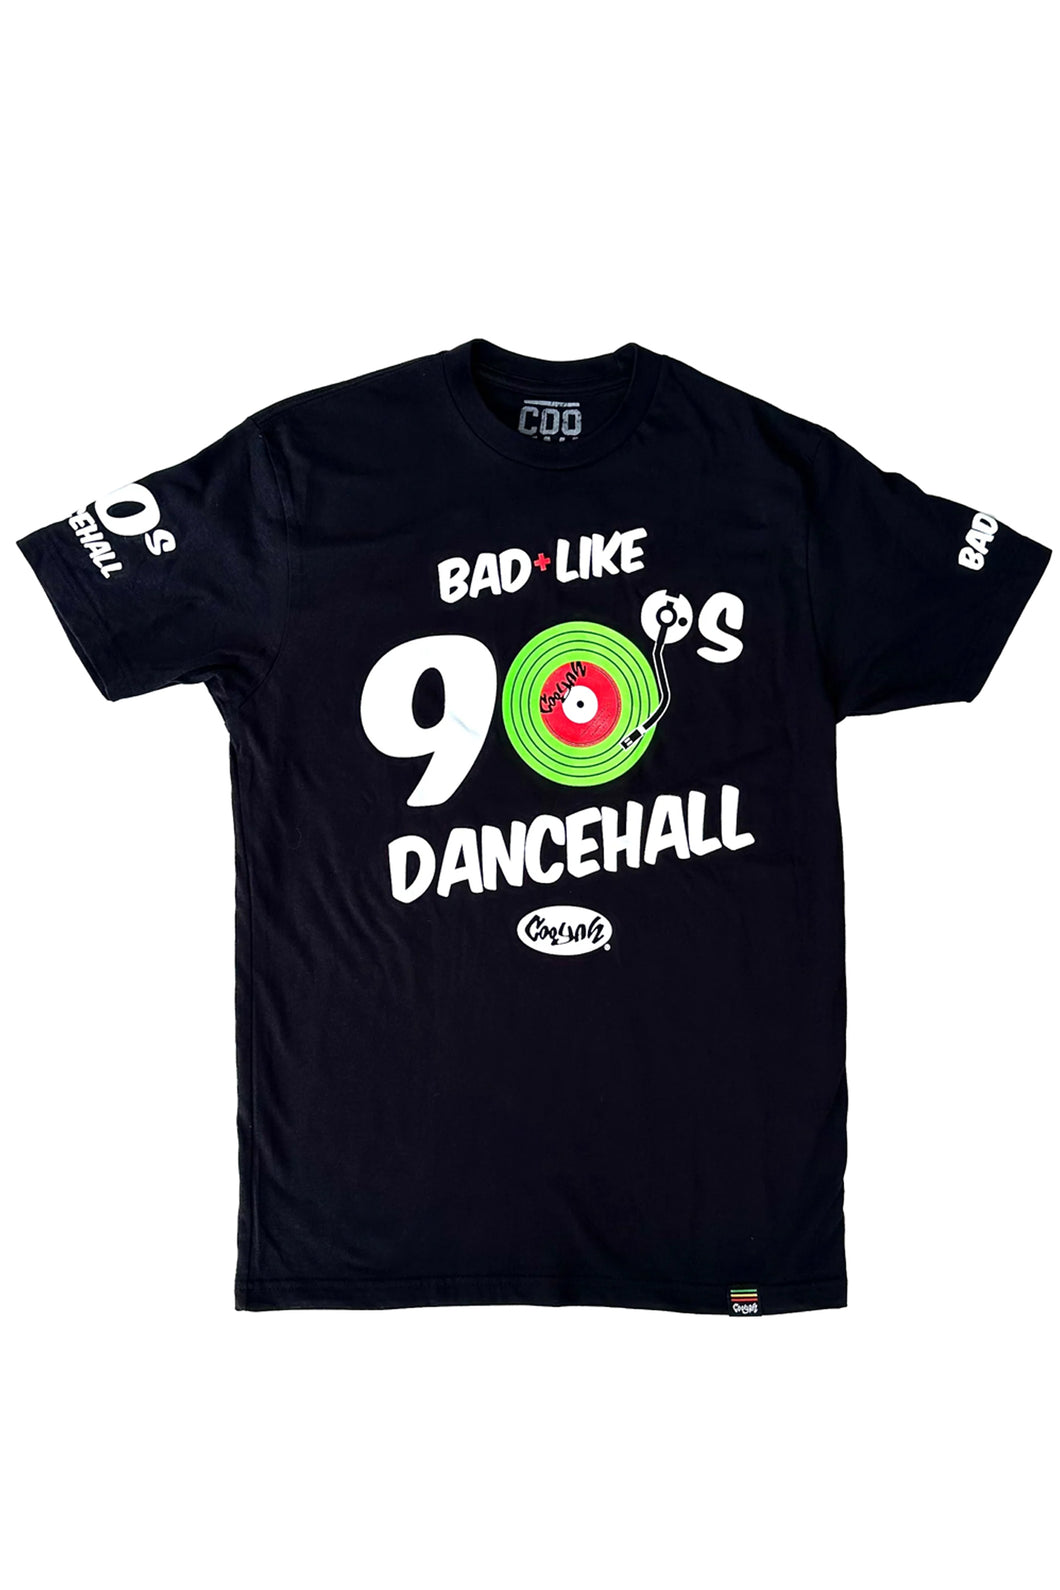 Men's Bad Like 90's Dancehall T-Shirt Limited Edition